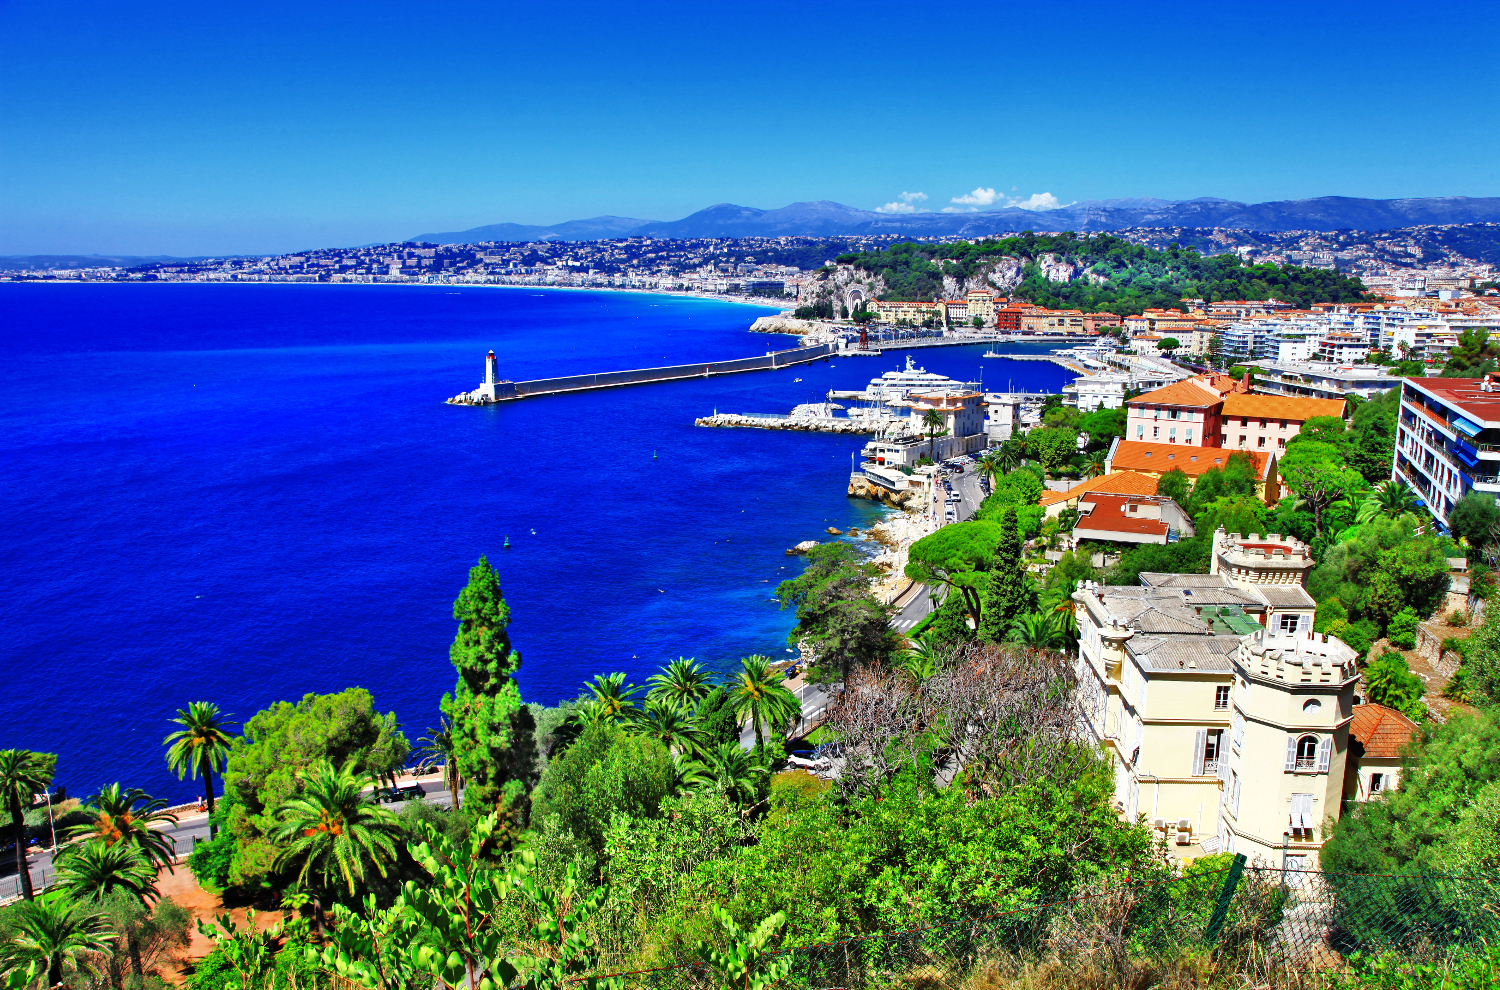 Nice, French Riviera, #France, #travel #best #photos and #places